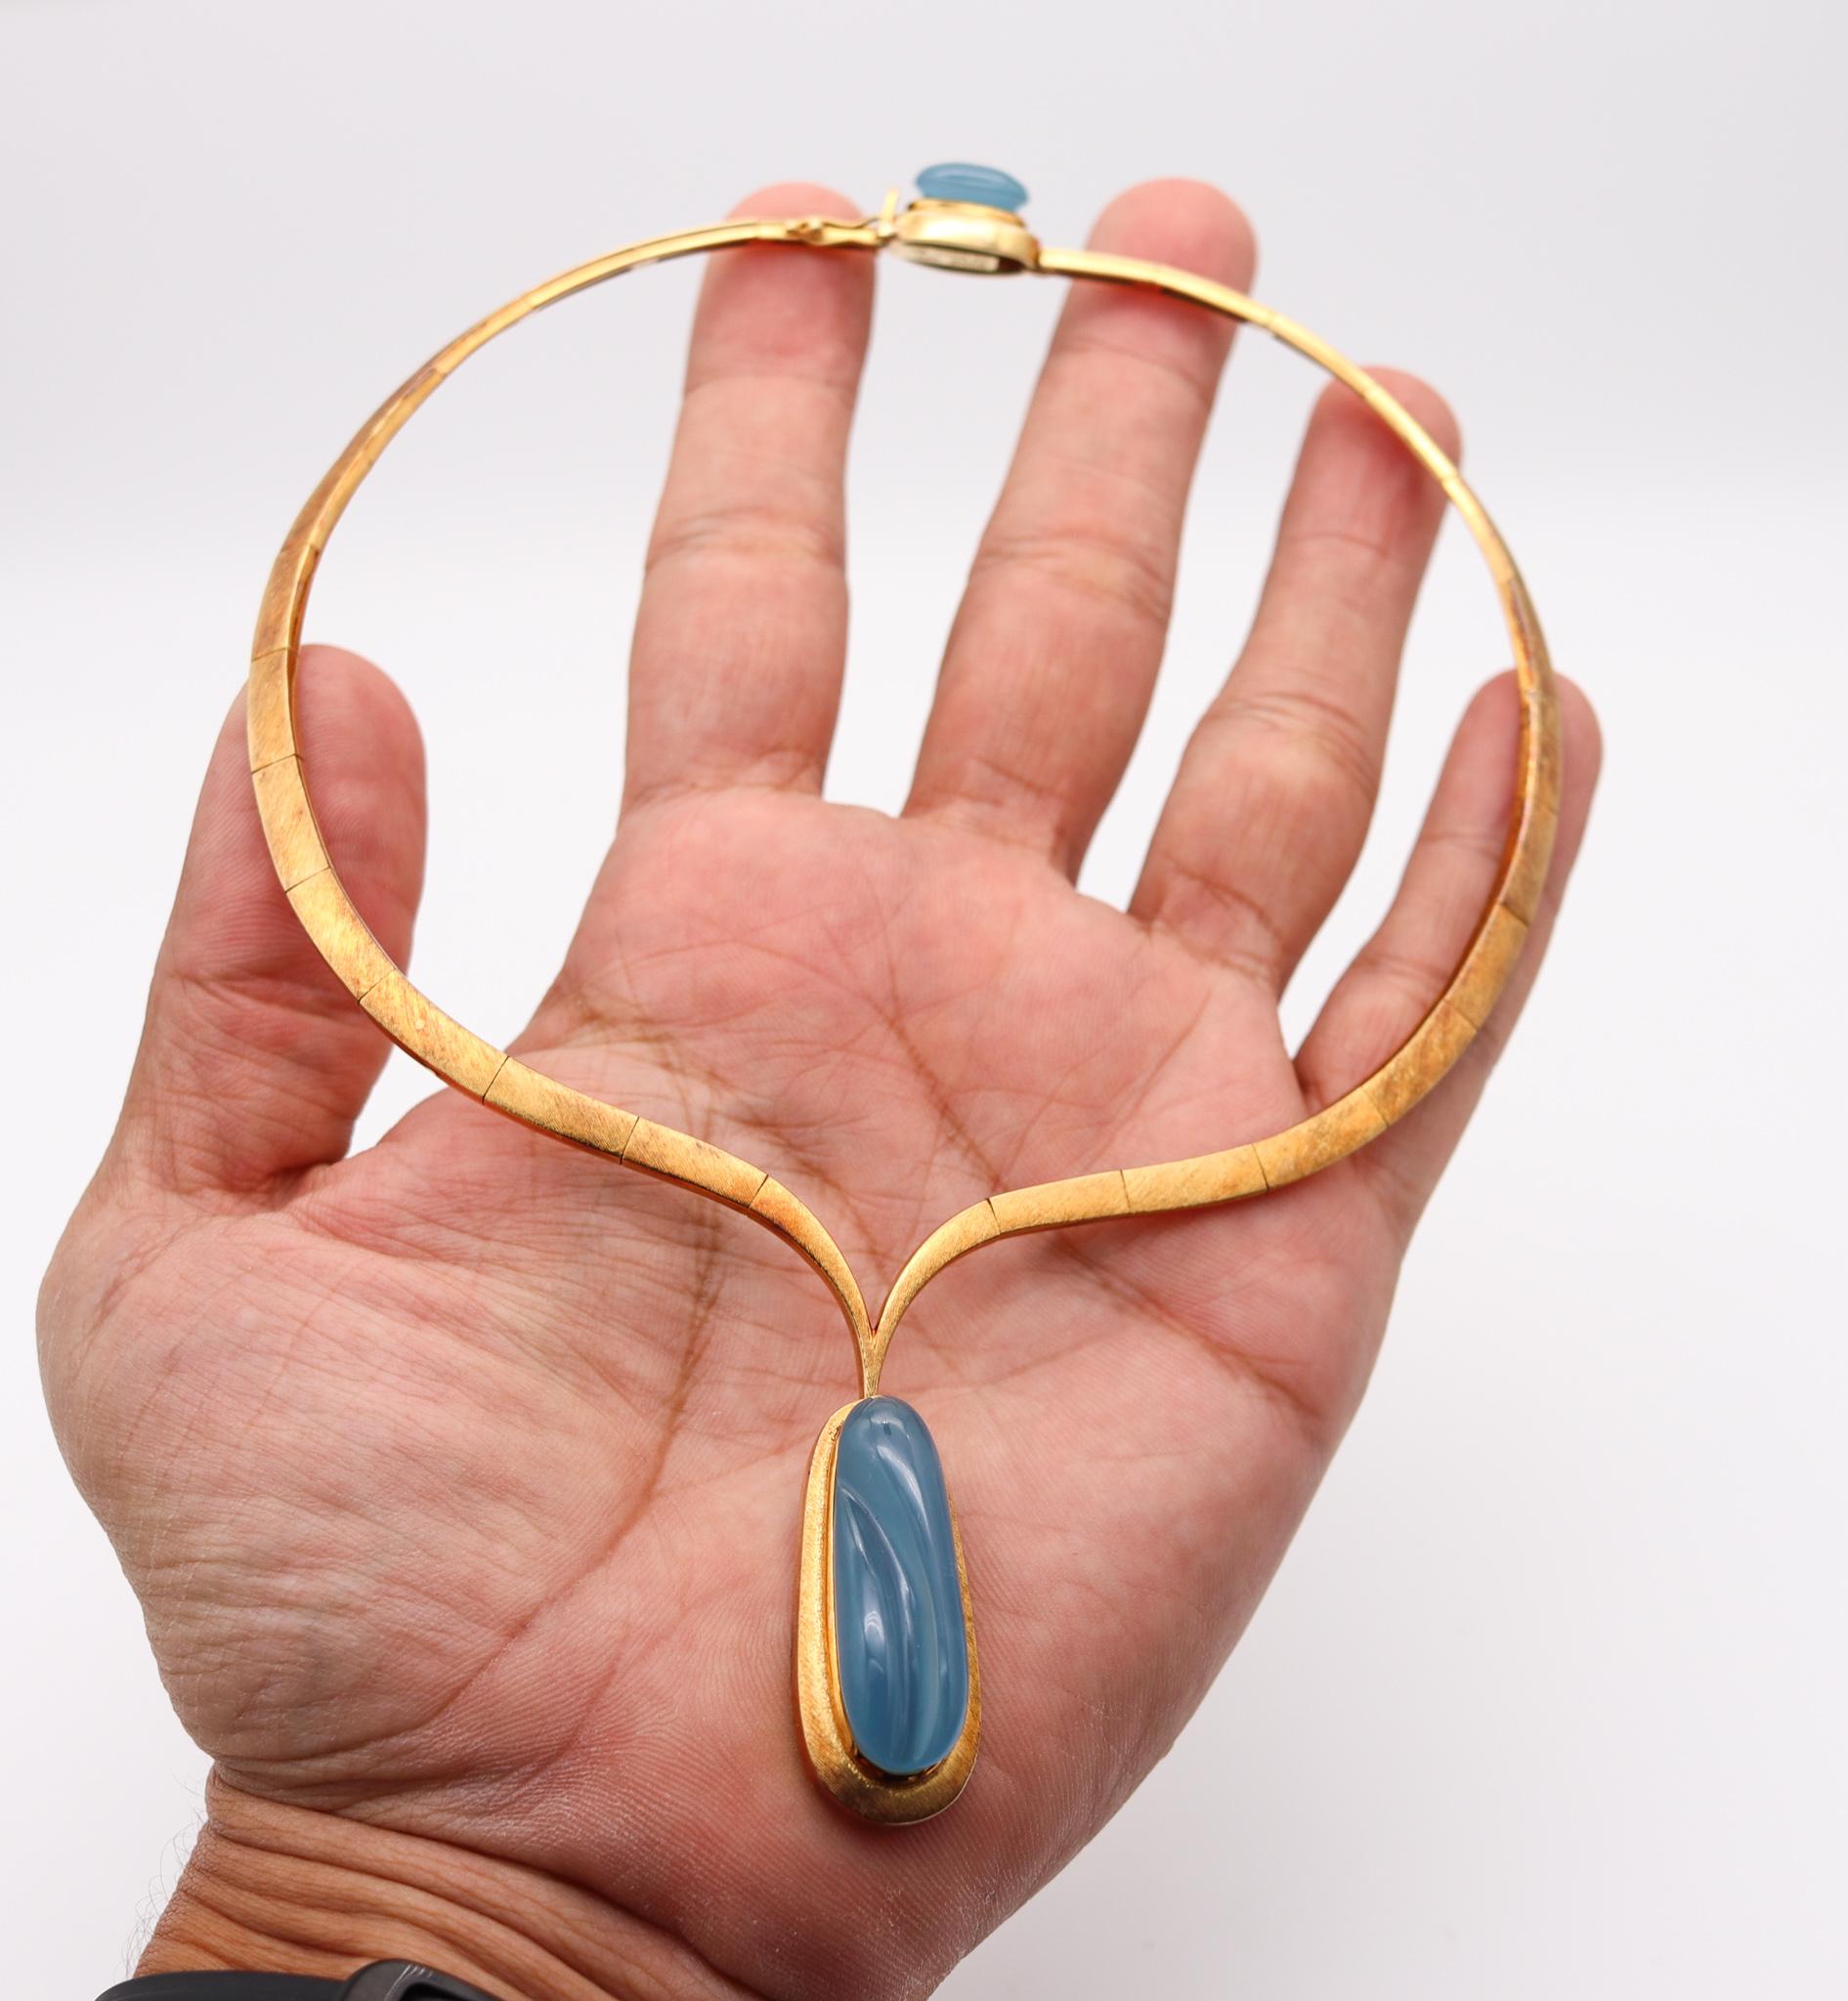 Women's Burle Marx 1968 Brazil Necklace In 18Kt Yellow Gold With Forma Livre Aquamarine